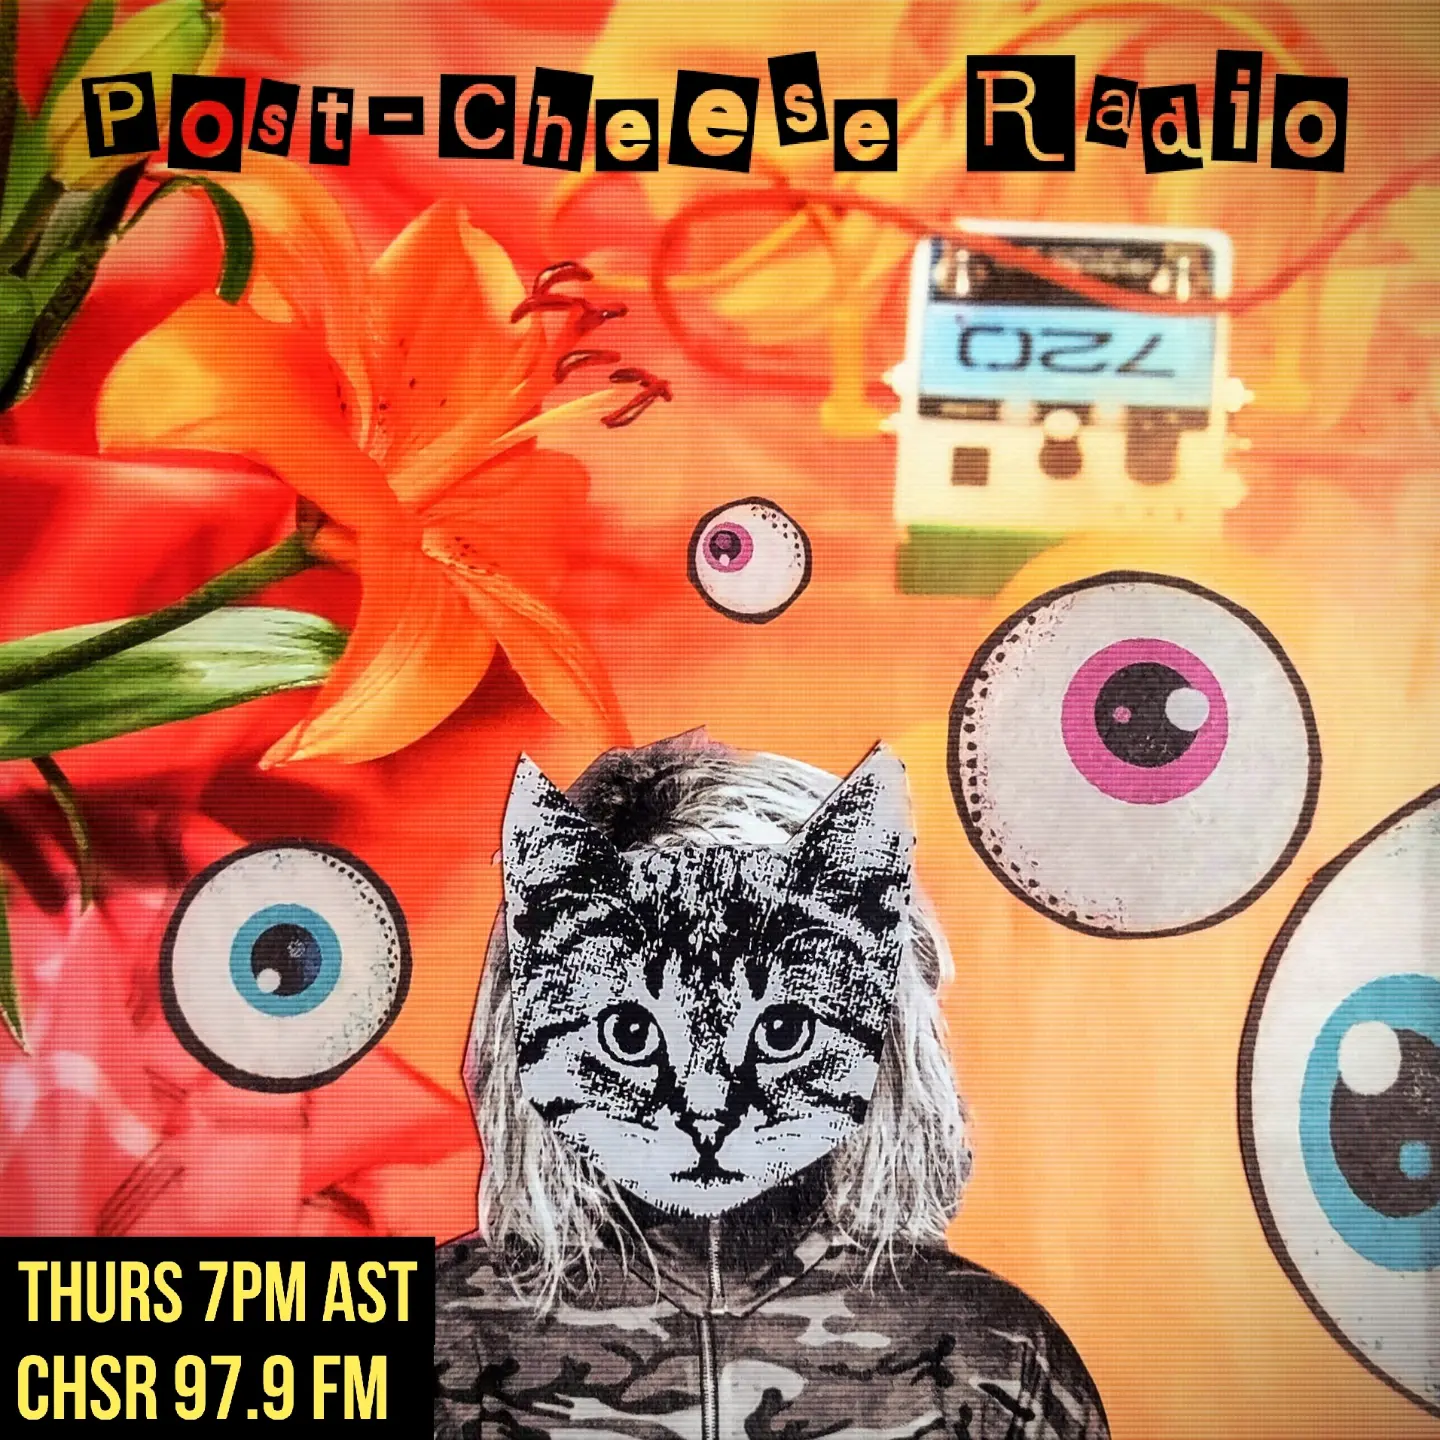 Collage art for Post-Cheese Radio featuring an Electro-Harmonix guitar pedal, floating eyeballs, and a cat's head on a human body. Flower for the backdrop.